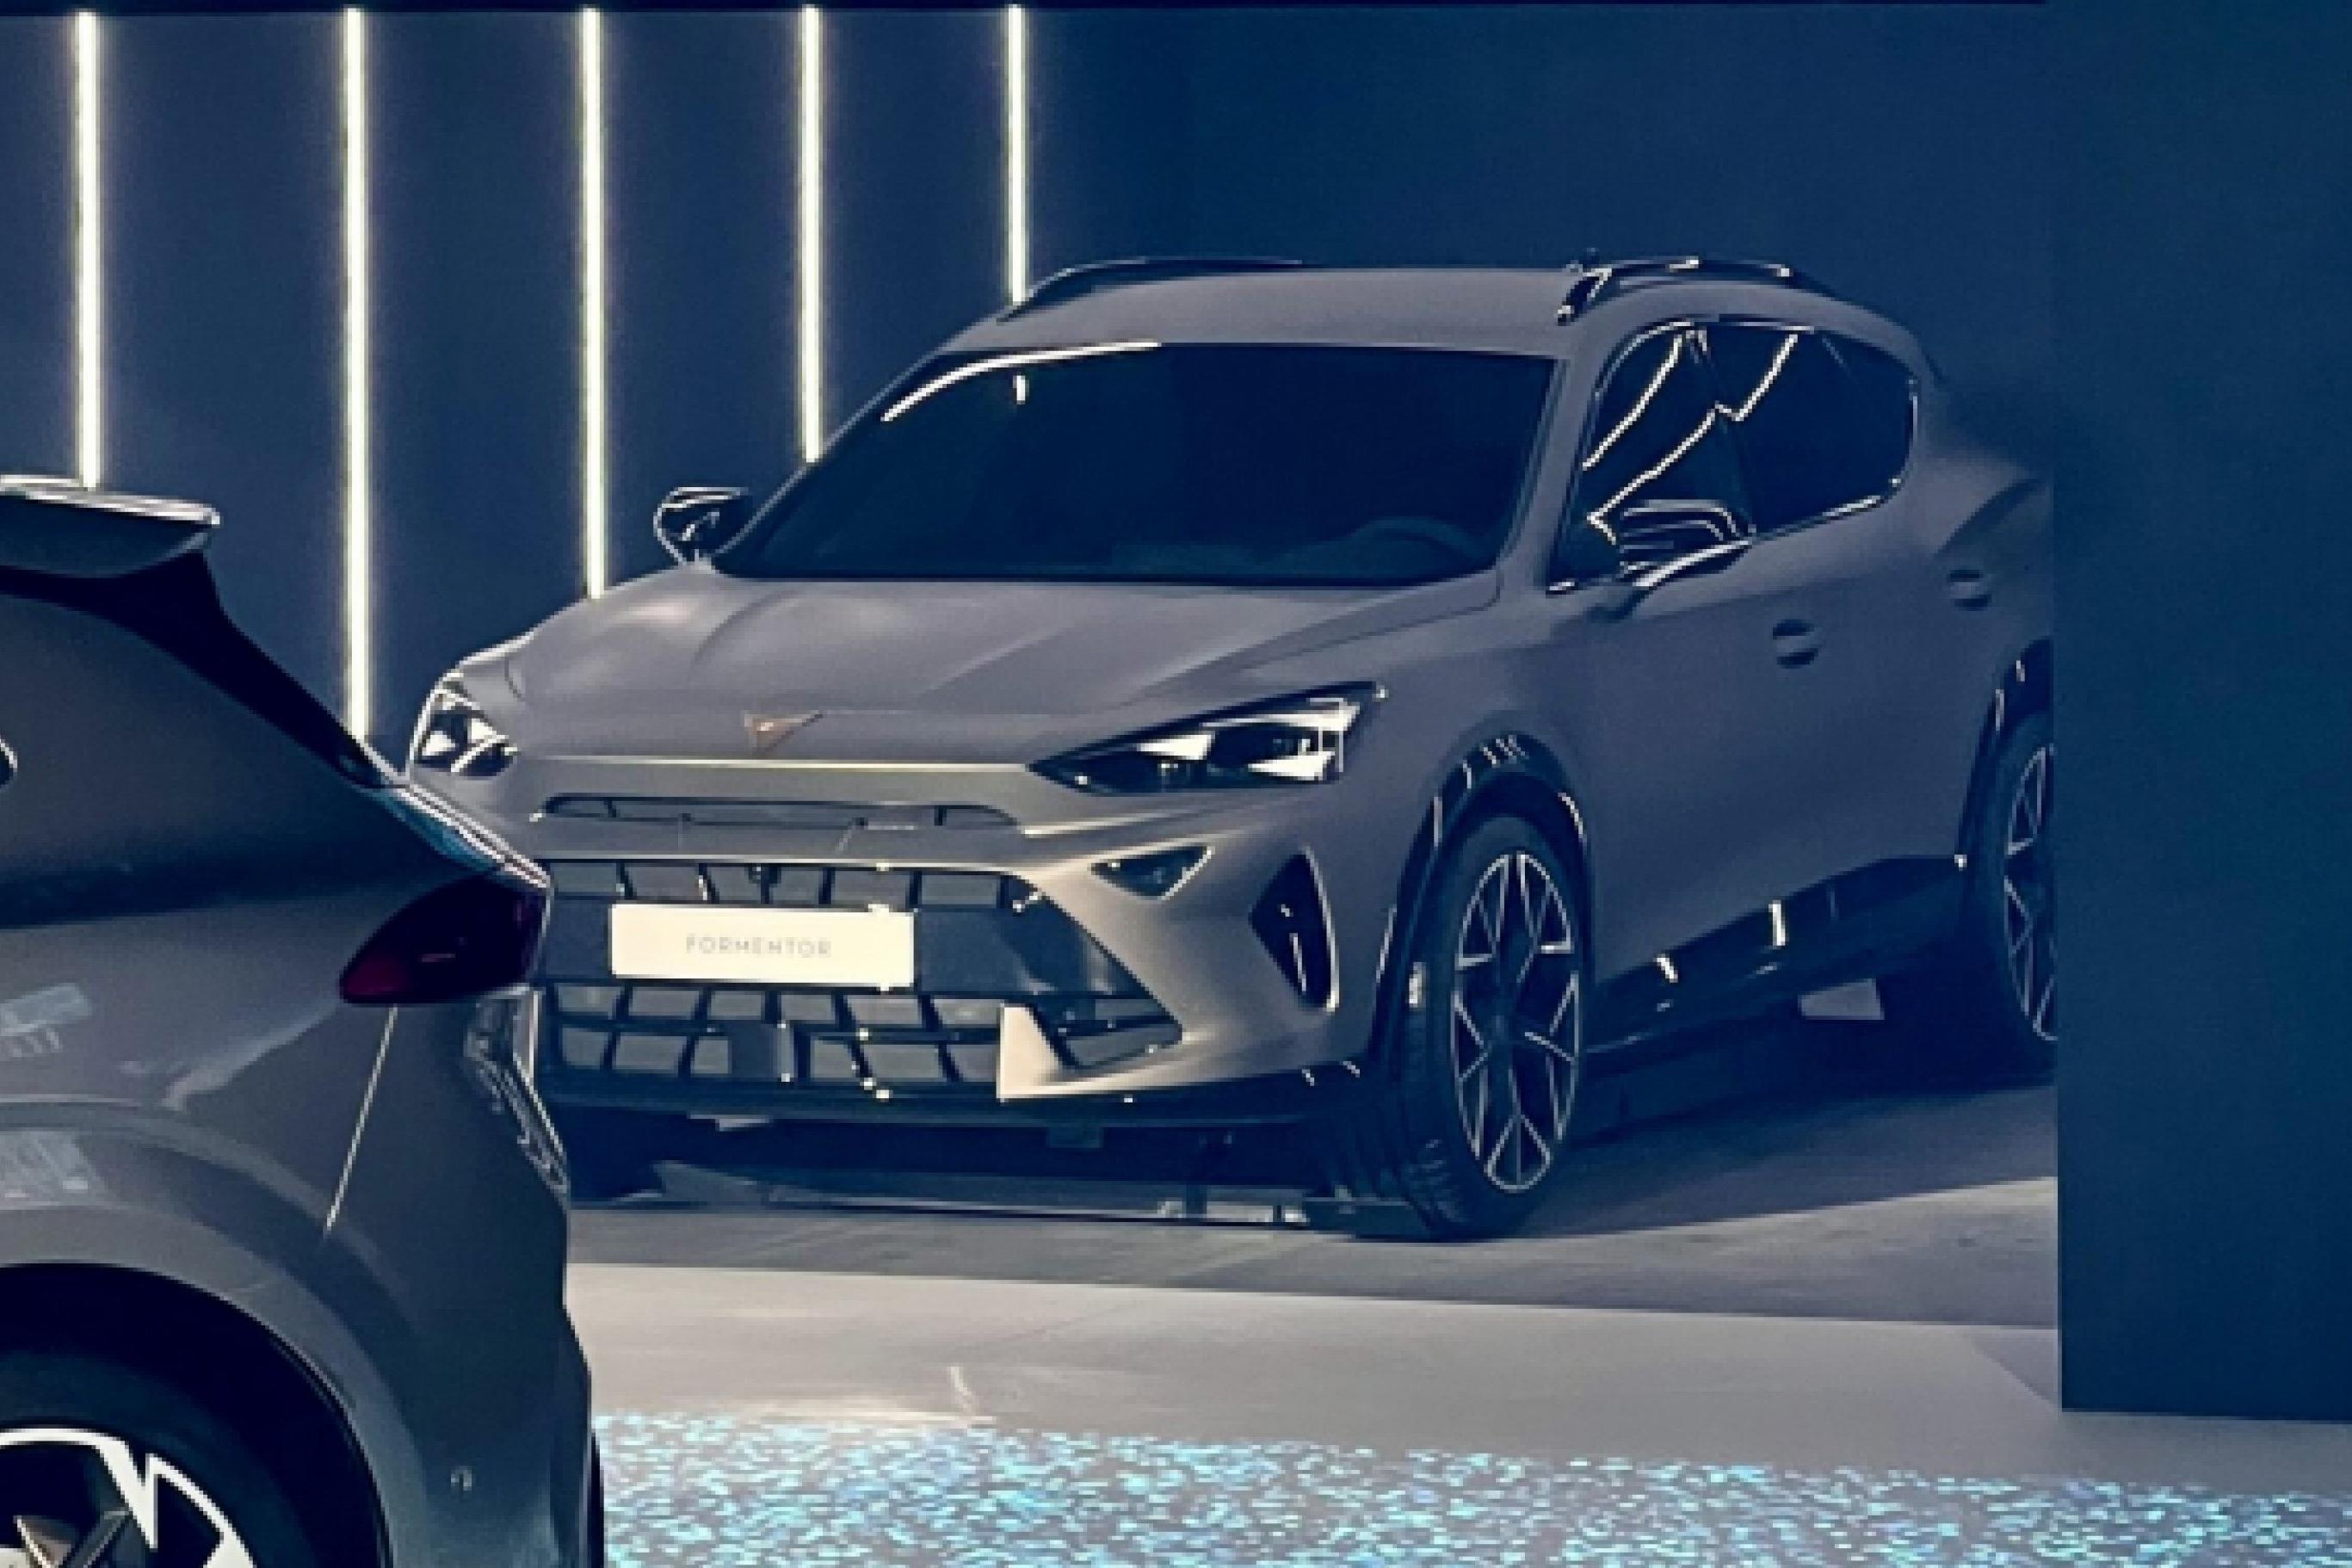 Formidable' new Cupra Formentor revealed - Select Car Leasing